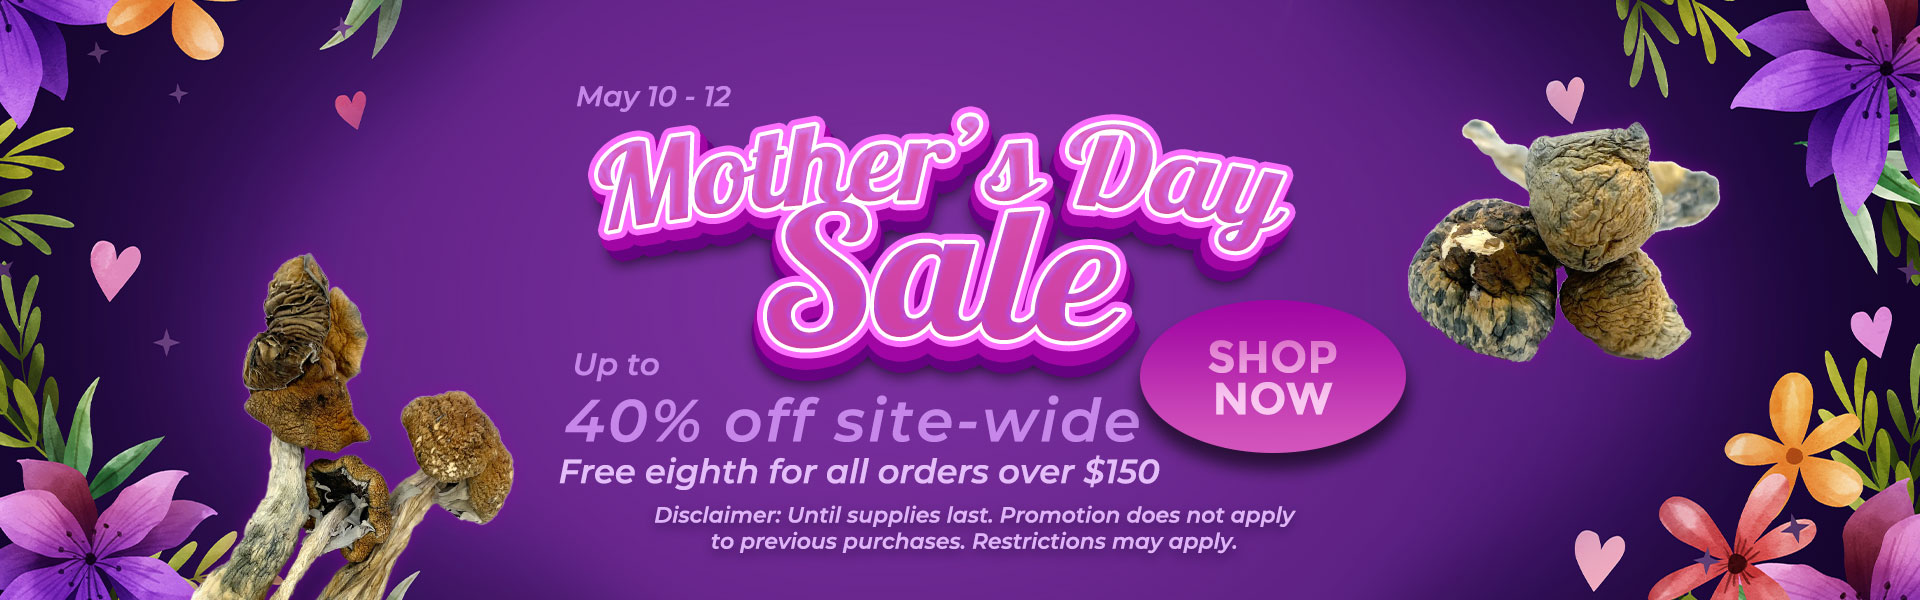 Ps Mothers Day Sale 1920x600 1